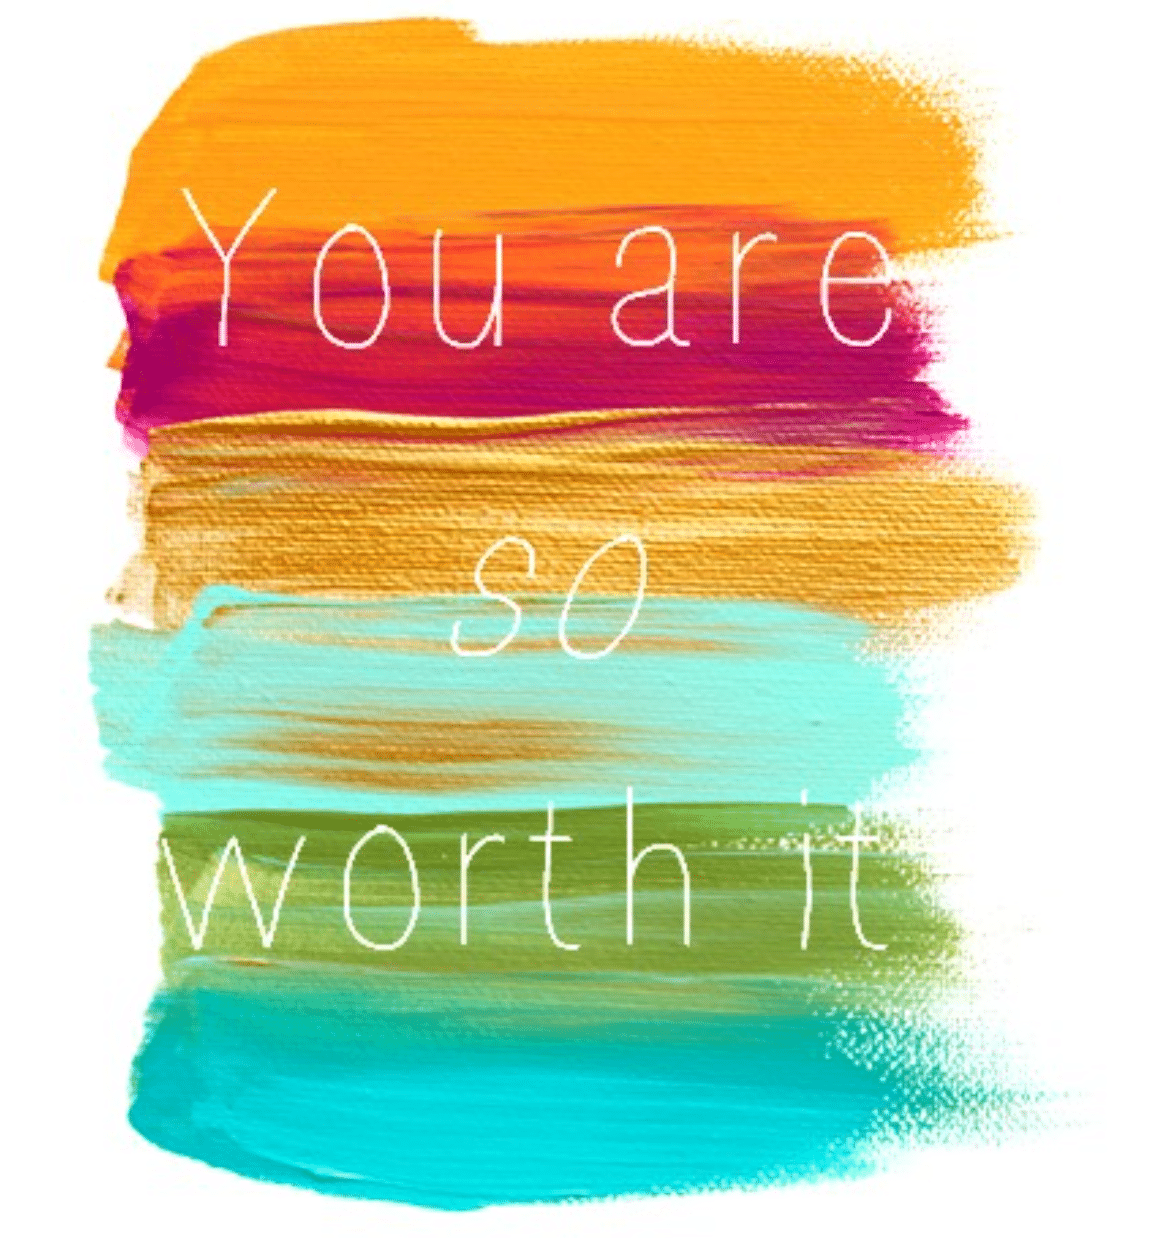 You are so worth it